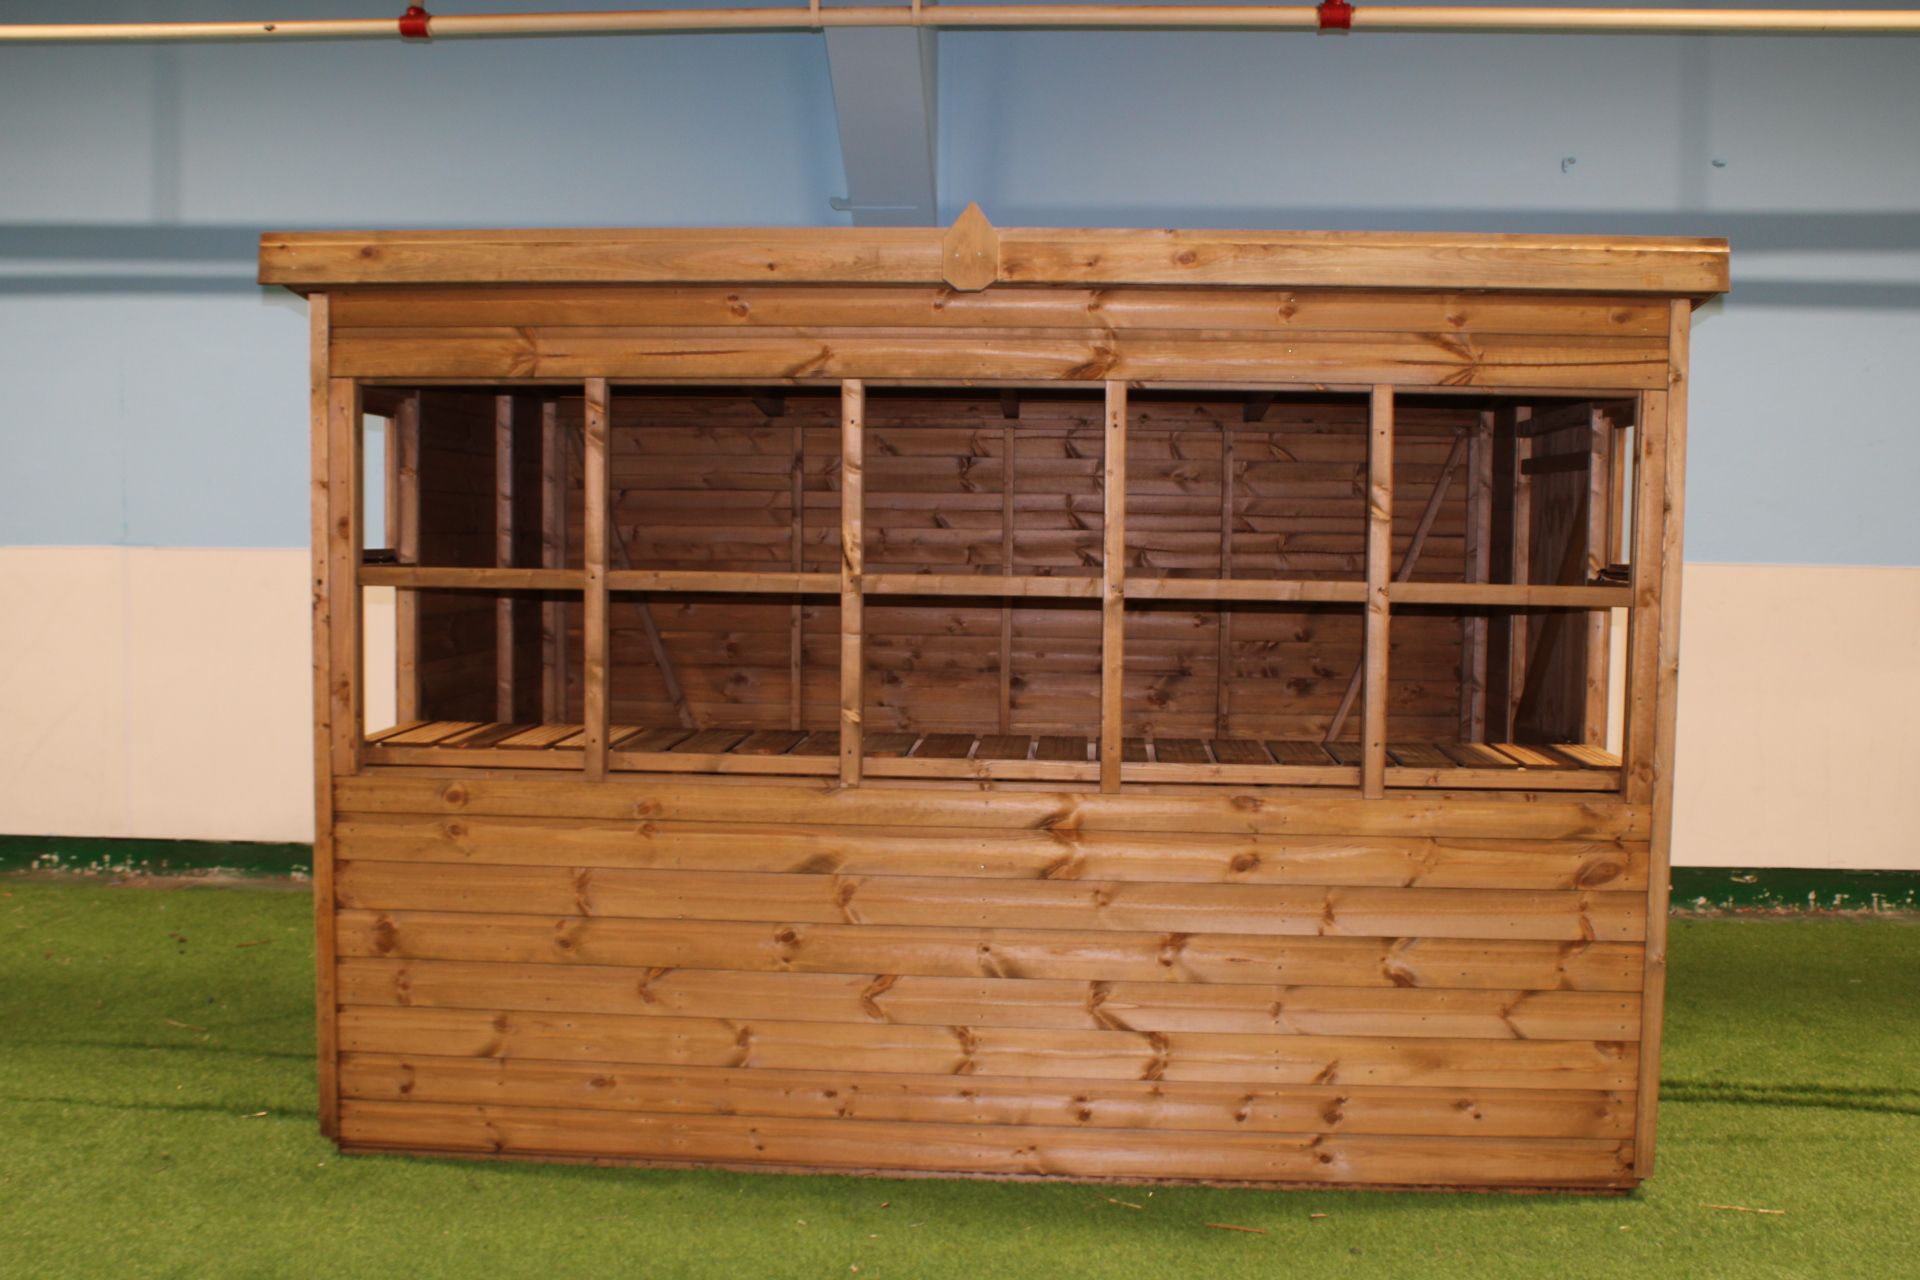 10X6 BRAND NEW Potting shed, Standard 16mm Nominal Cladding (SUNPENT) RRP£1400